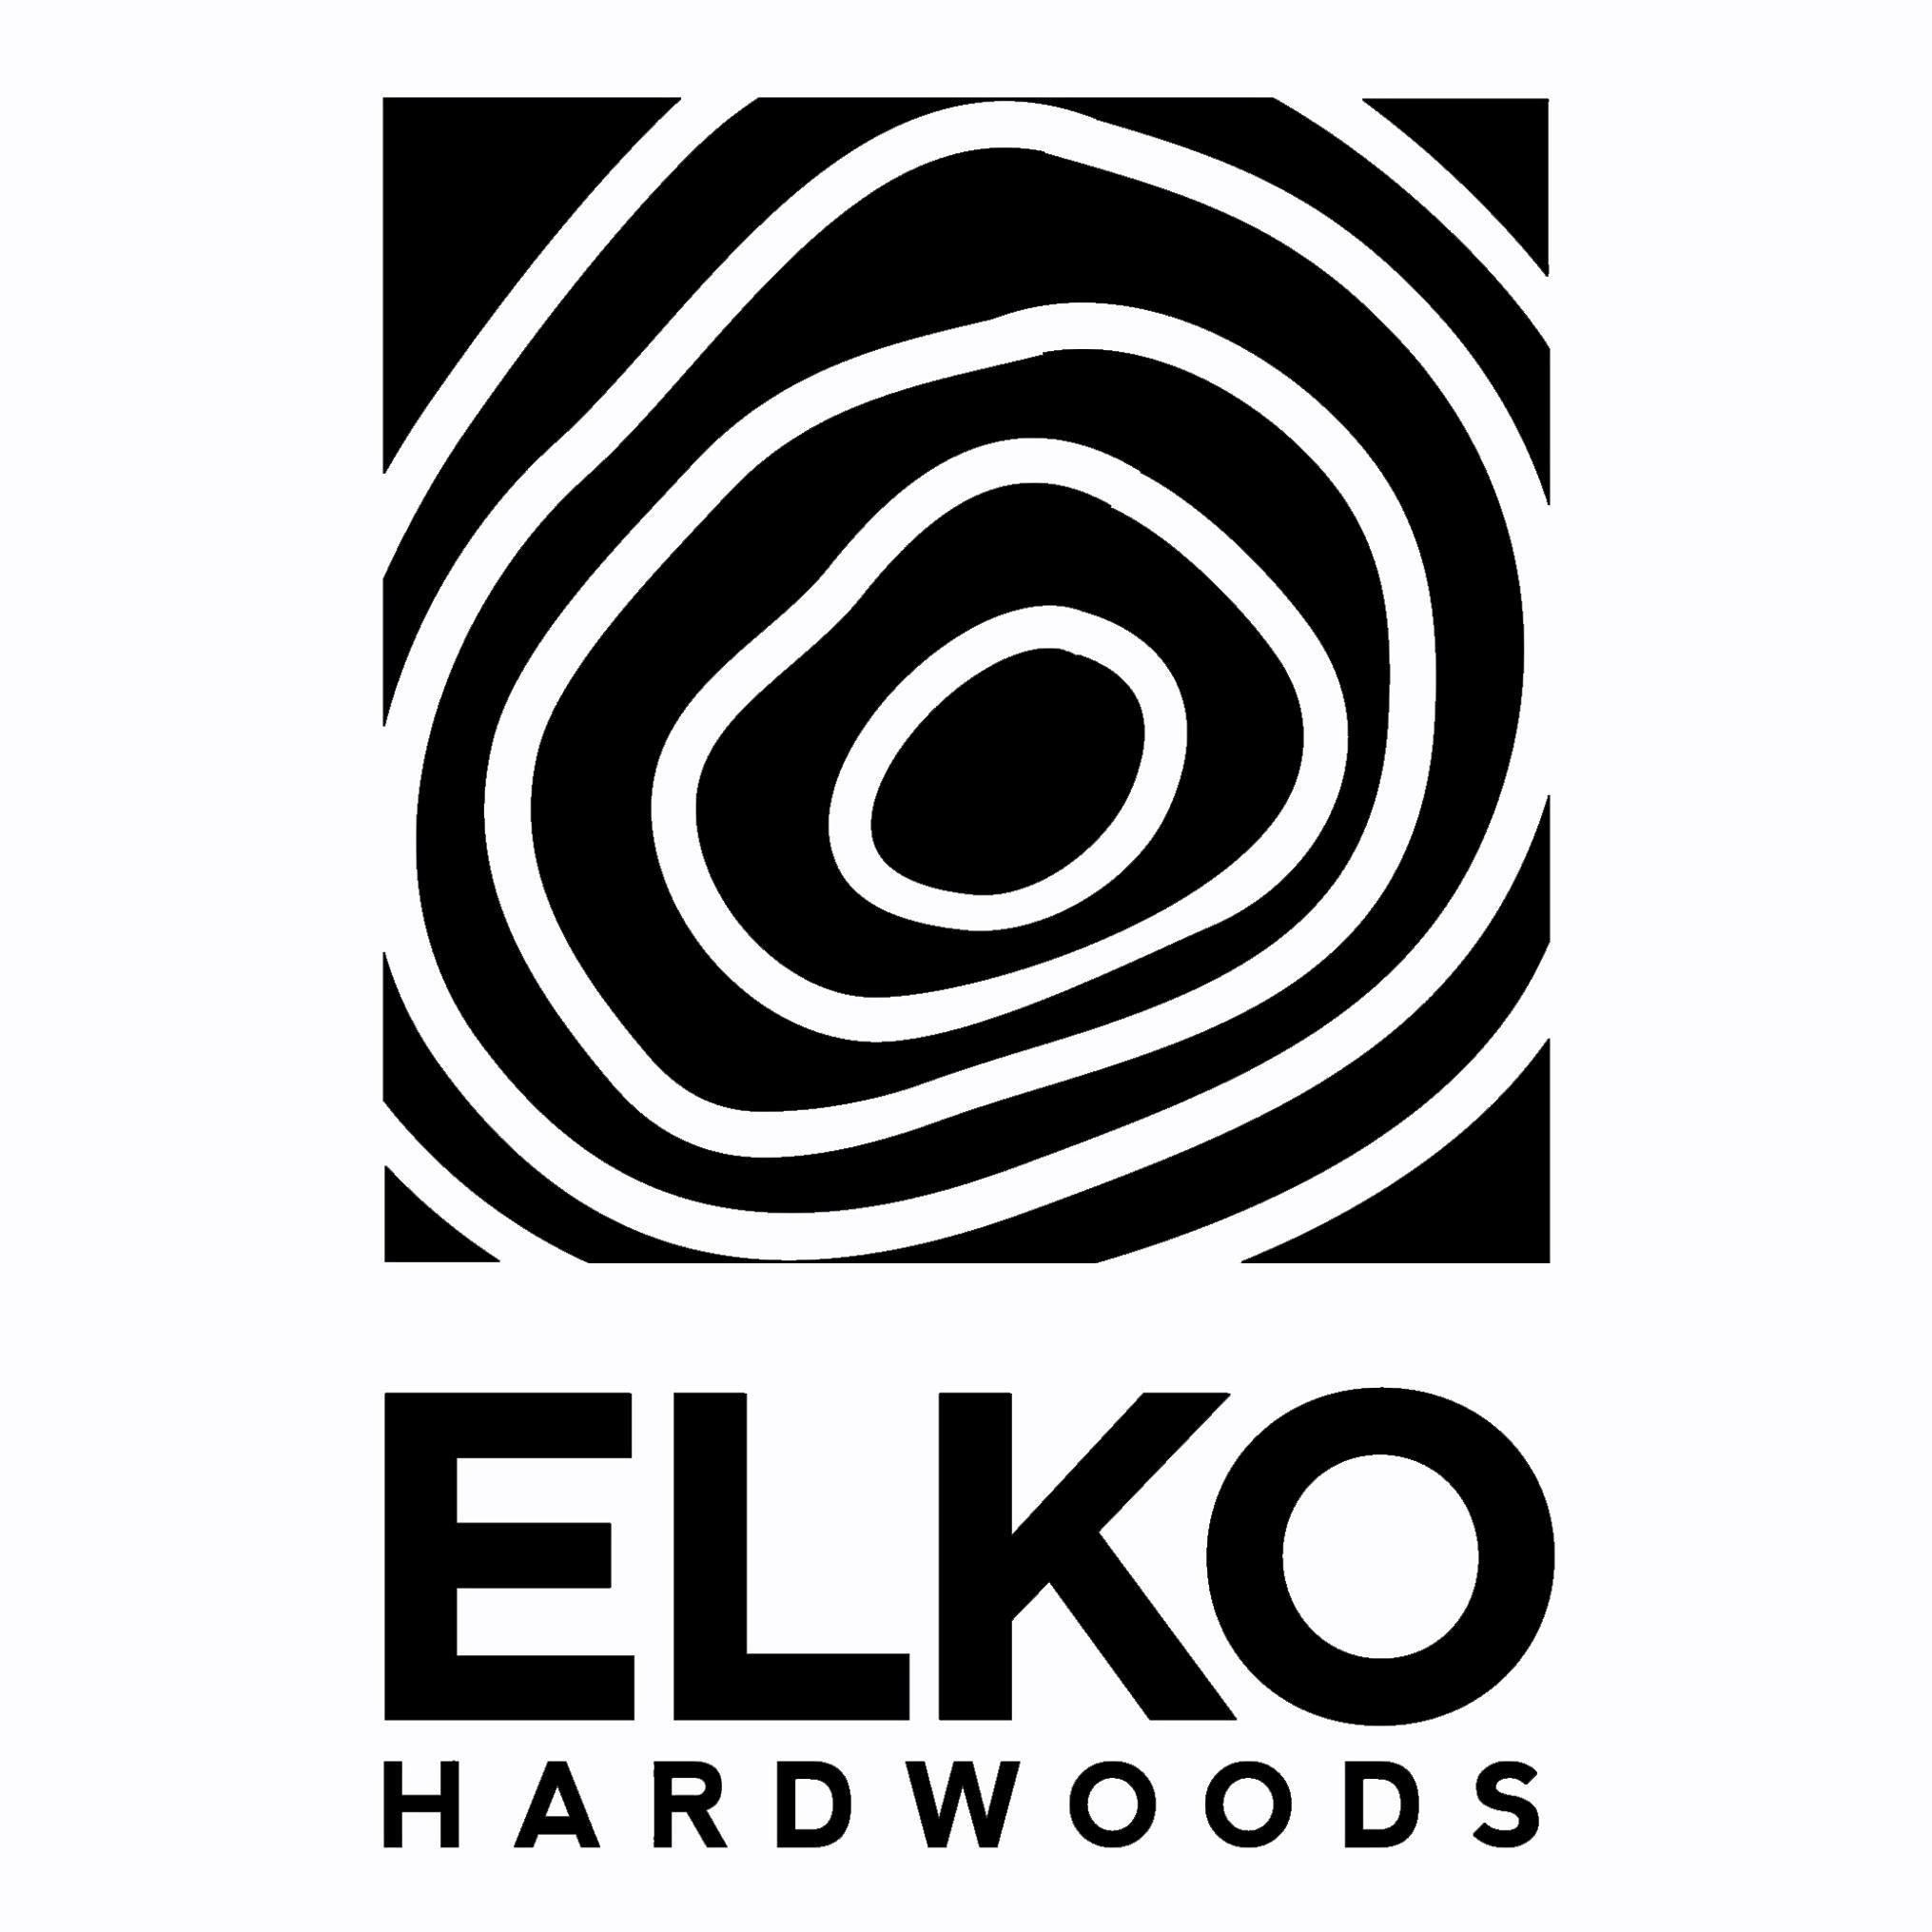 Elko Hardwoods builds contemporary, one of a kind, live edge furniture designed to capture the natural beauty of wood.